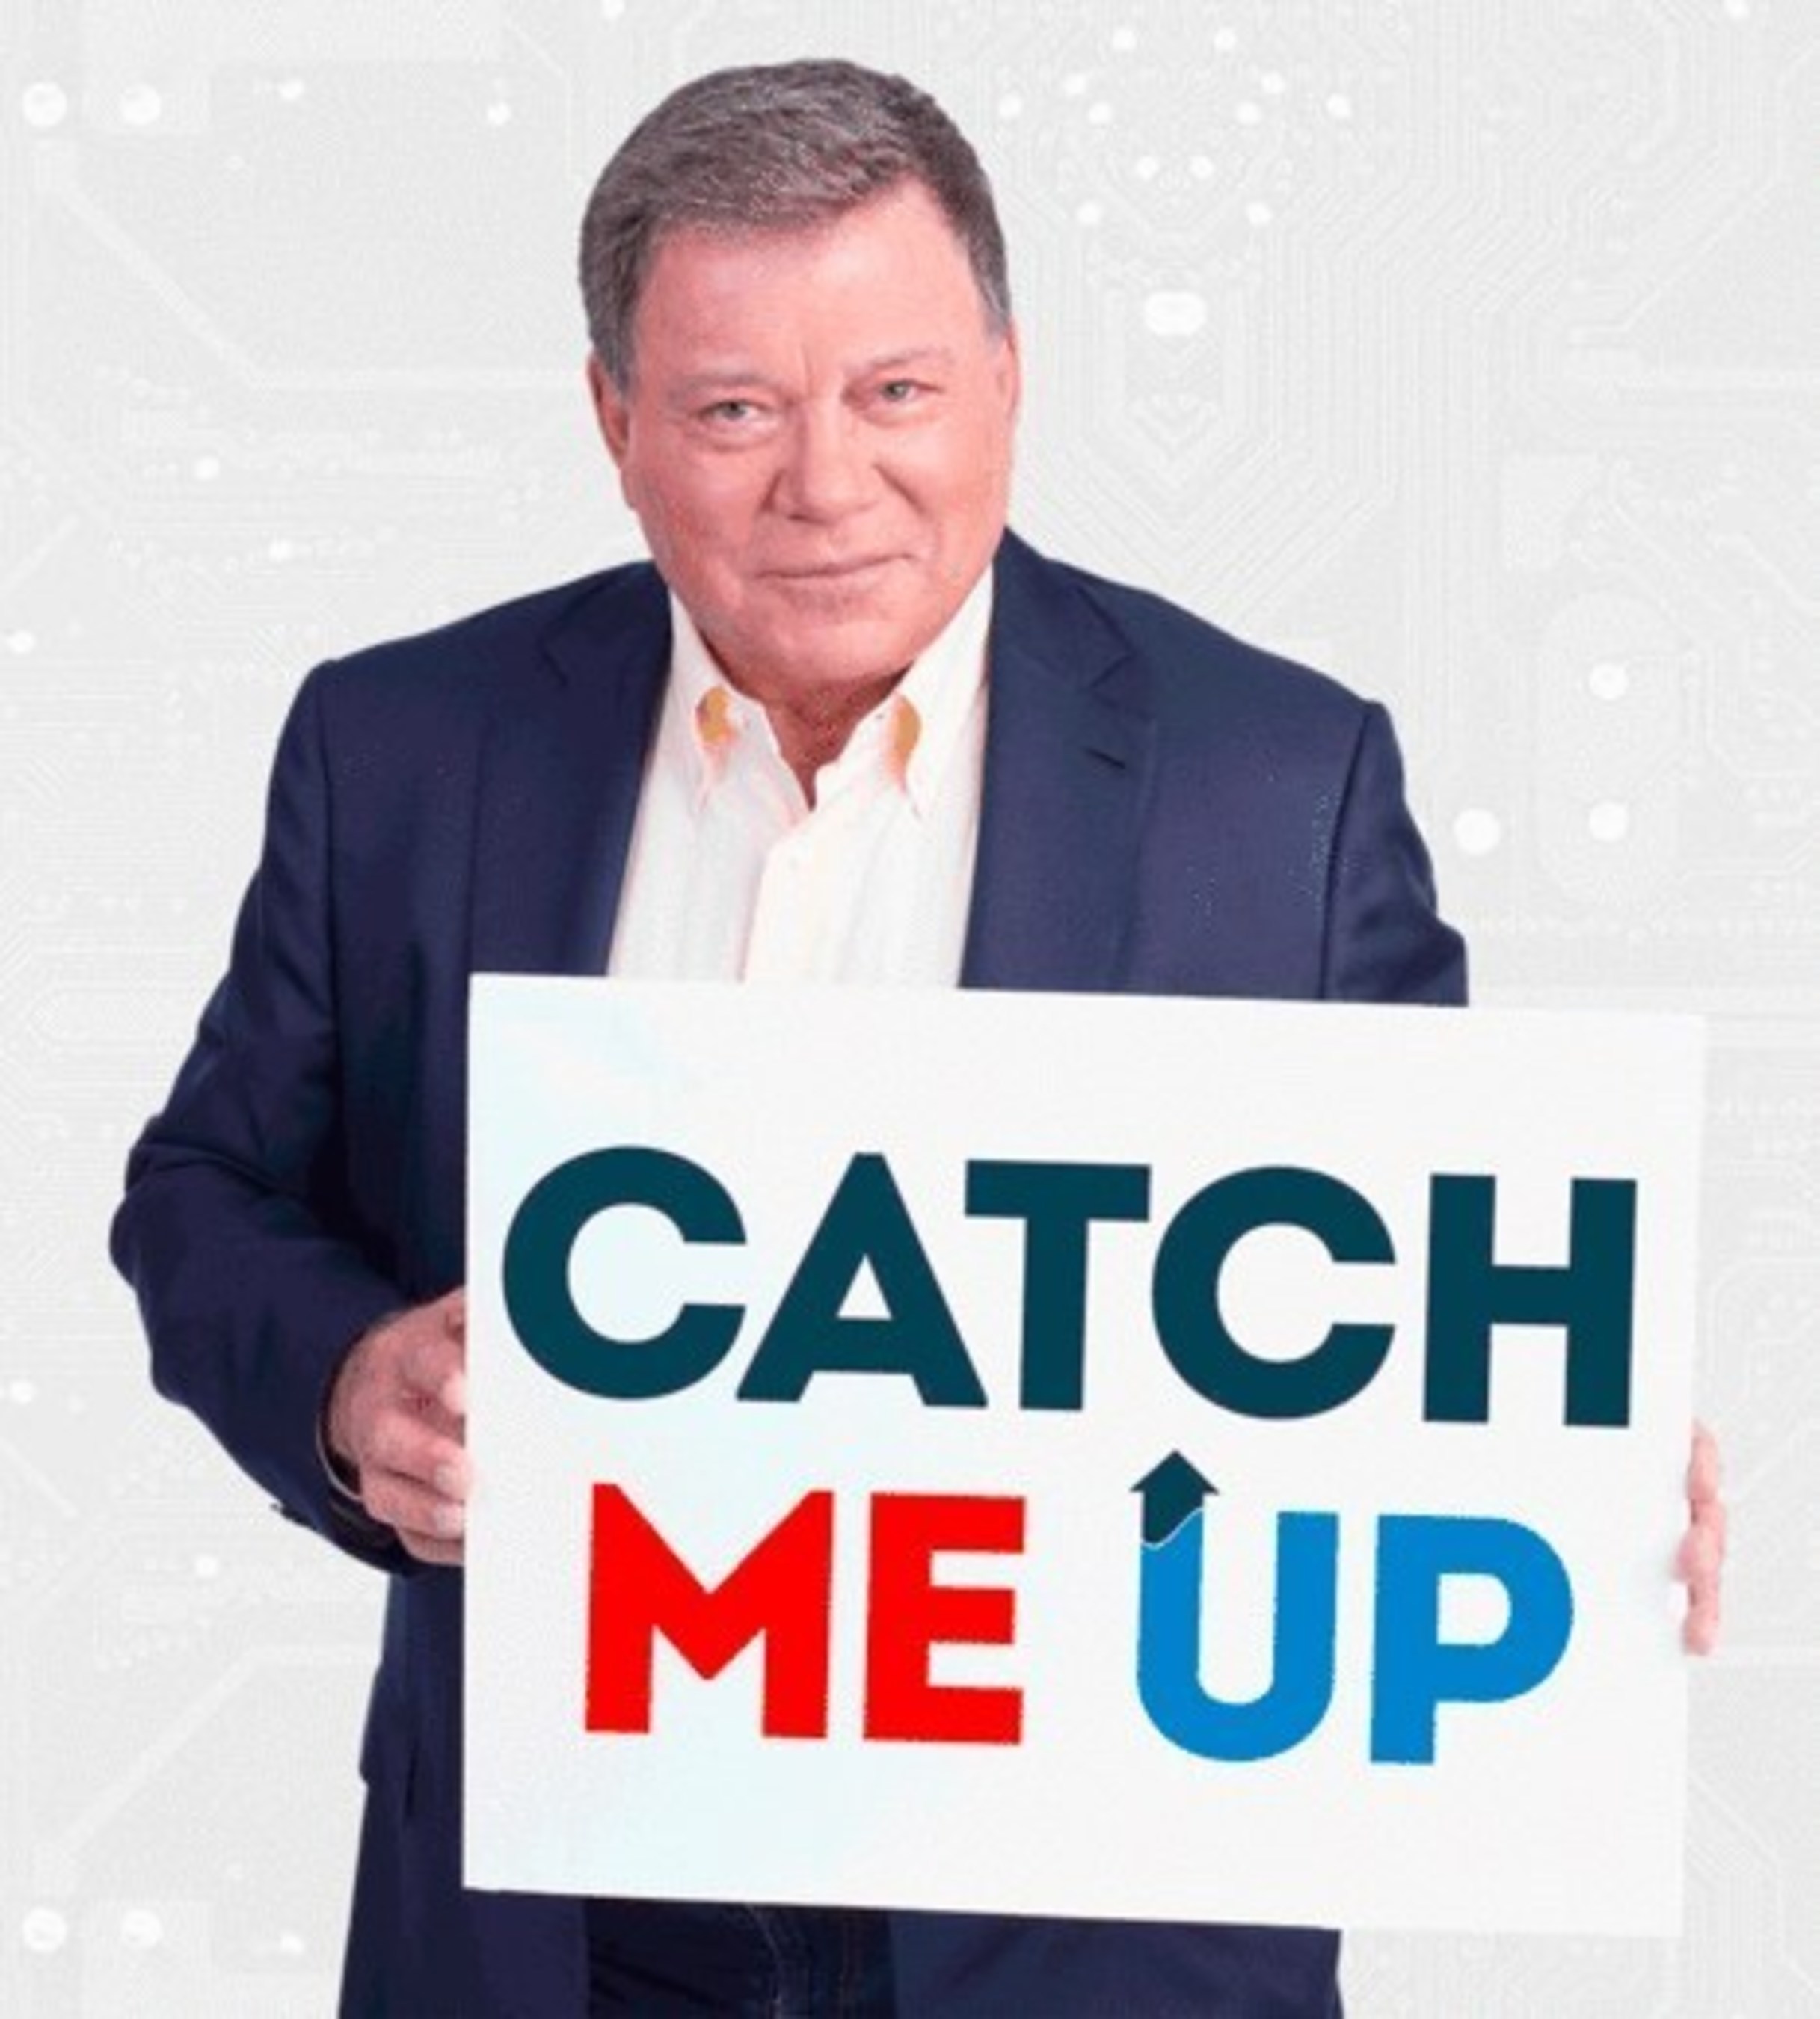 William Shatner is on a mission to help seniors "catch up" with new technology. The project is on kickstarter.com now.